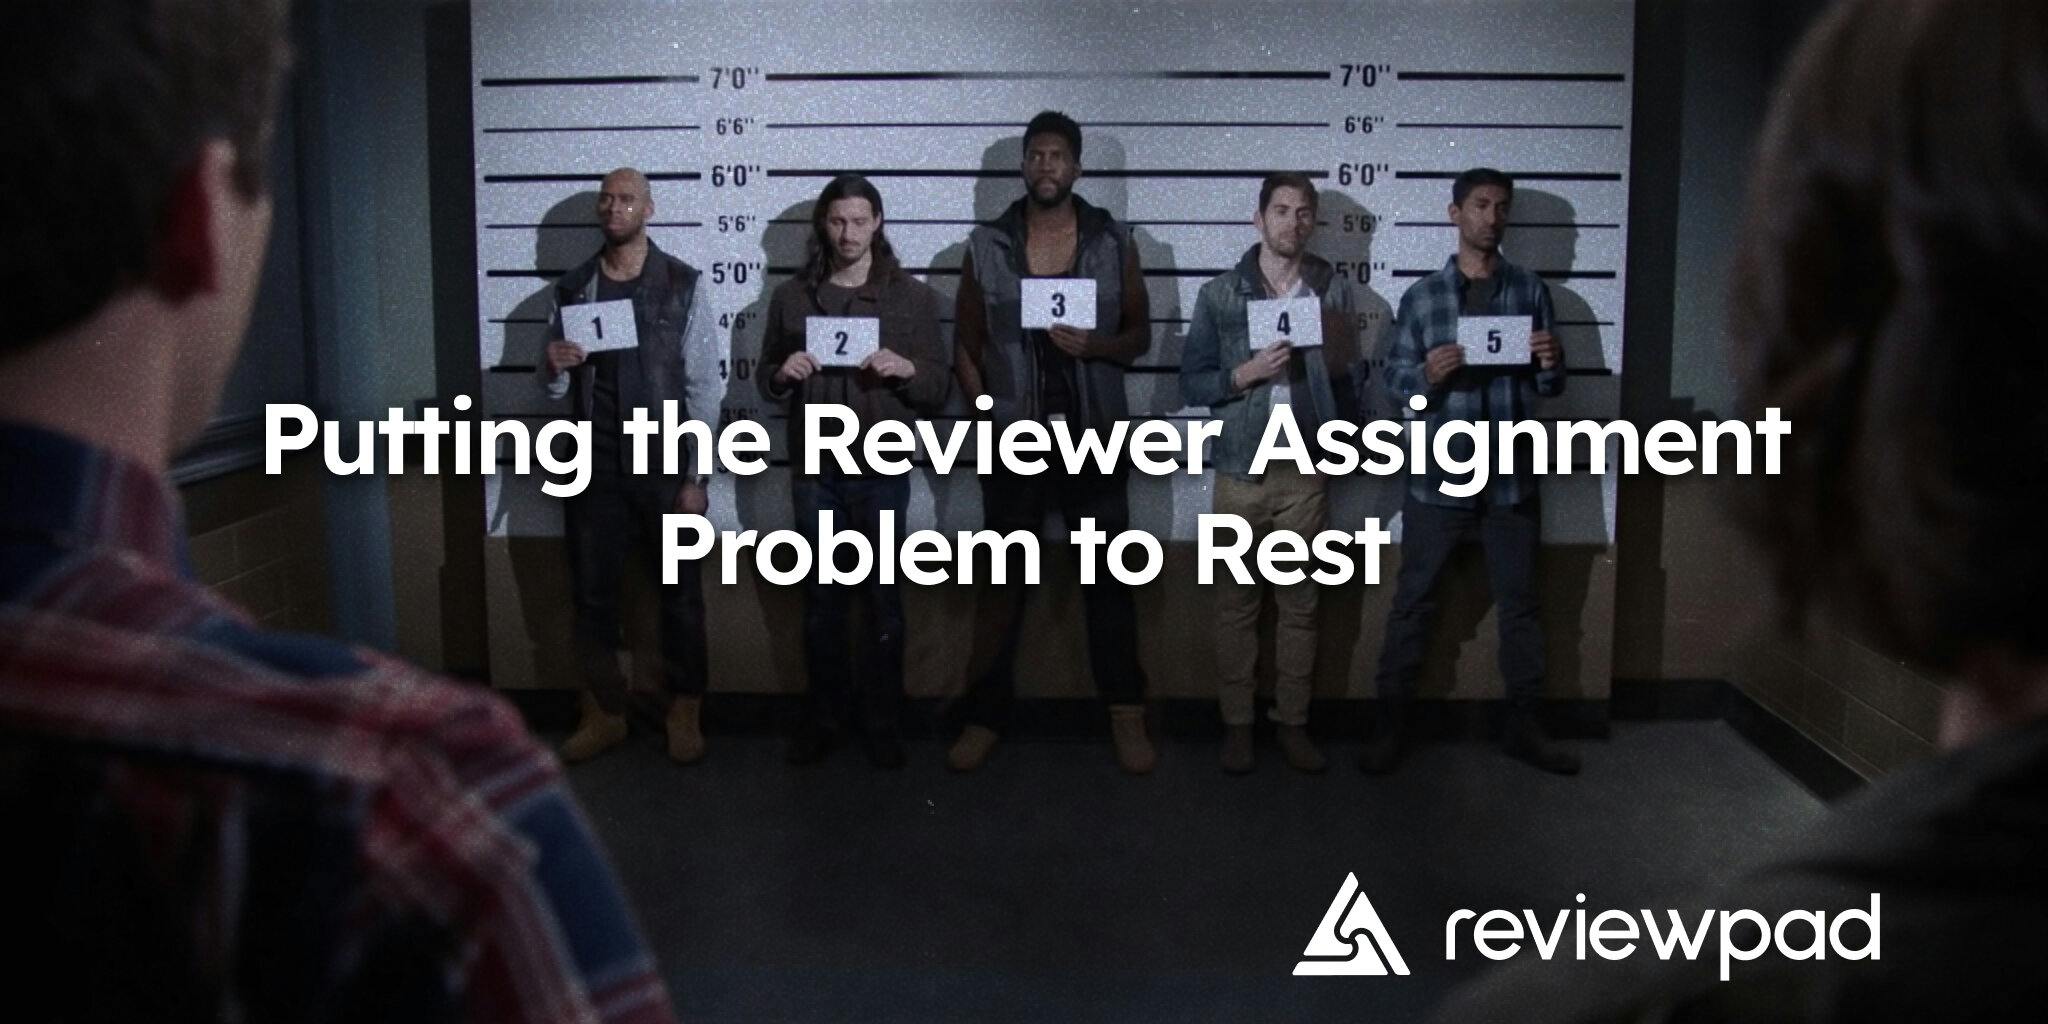 How Reviewpad is Putting the Reviewer Assignment Problem to Rest